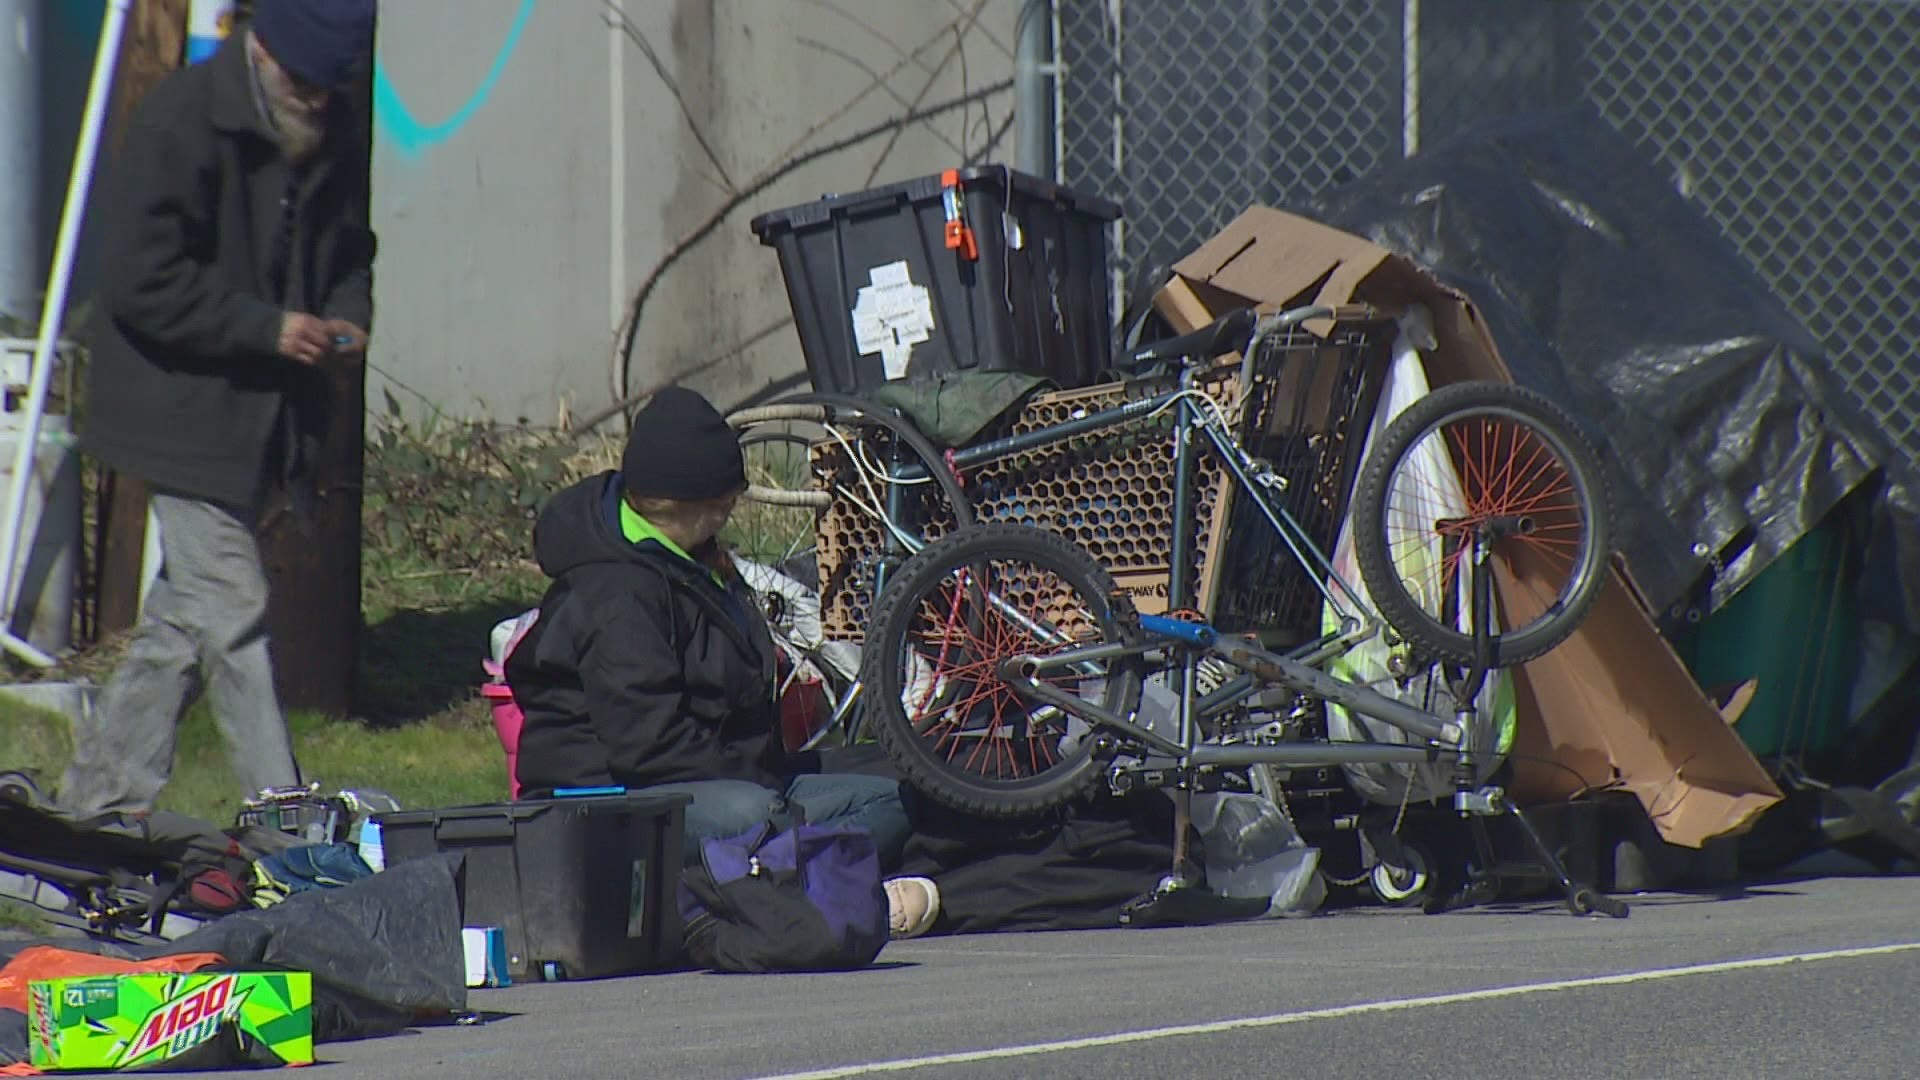 Homeless advocates said the ordinance only succeeded in moving encampments to different parts of the city. "They're just kicking the problem down the road."